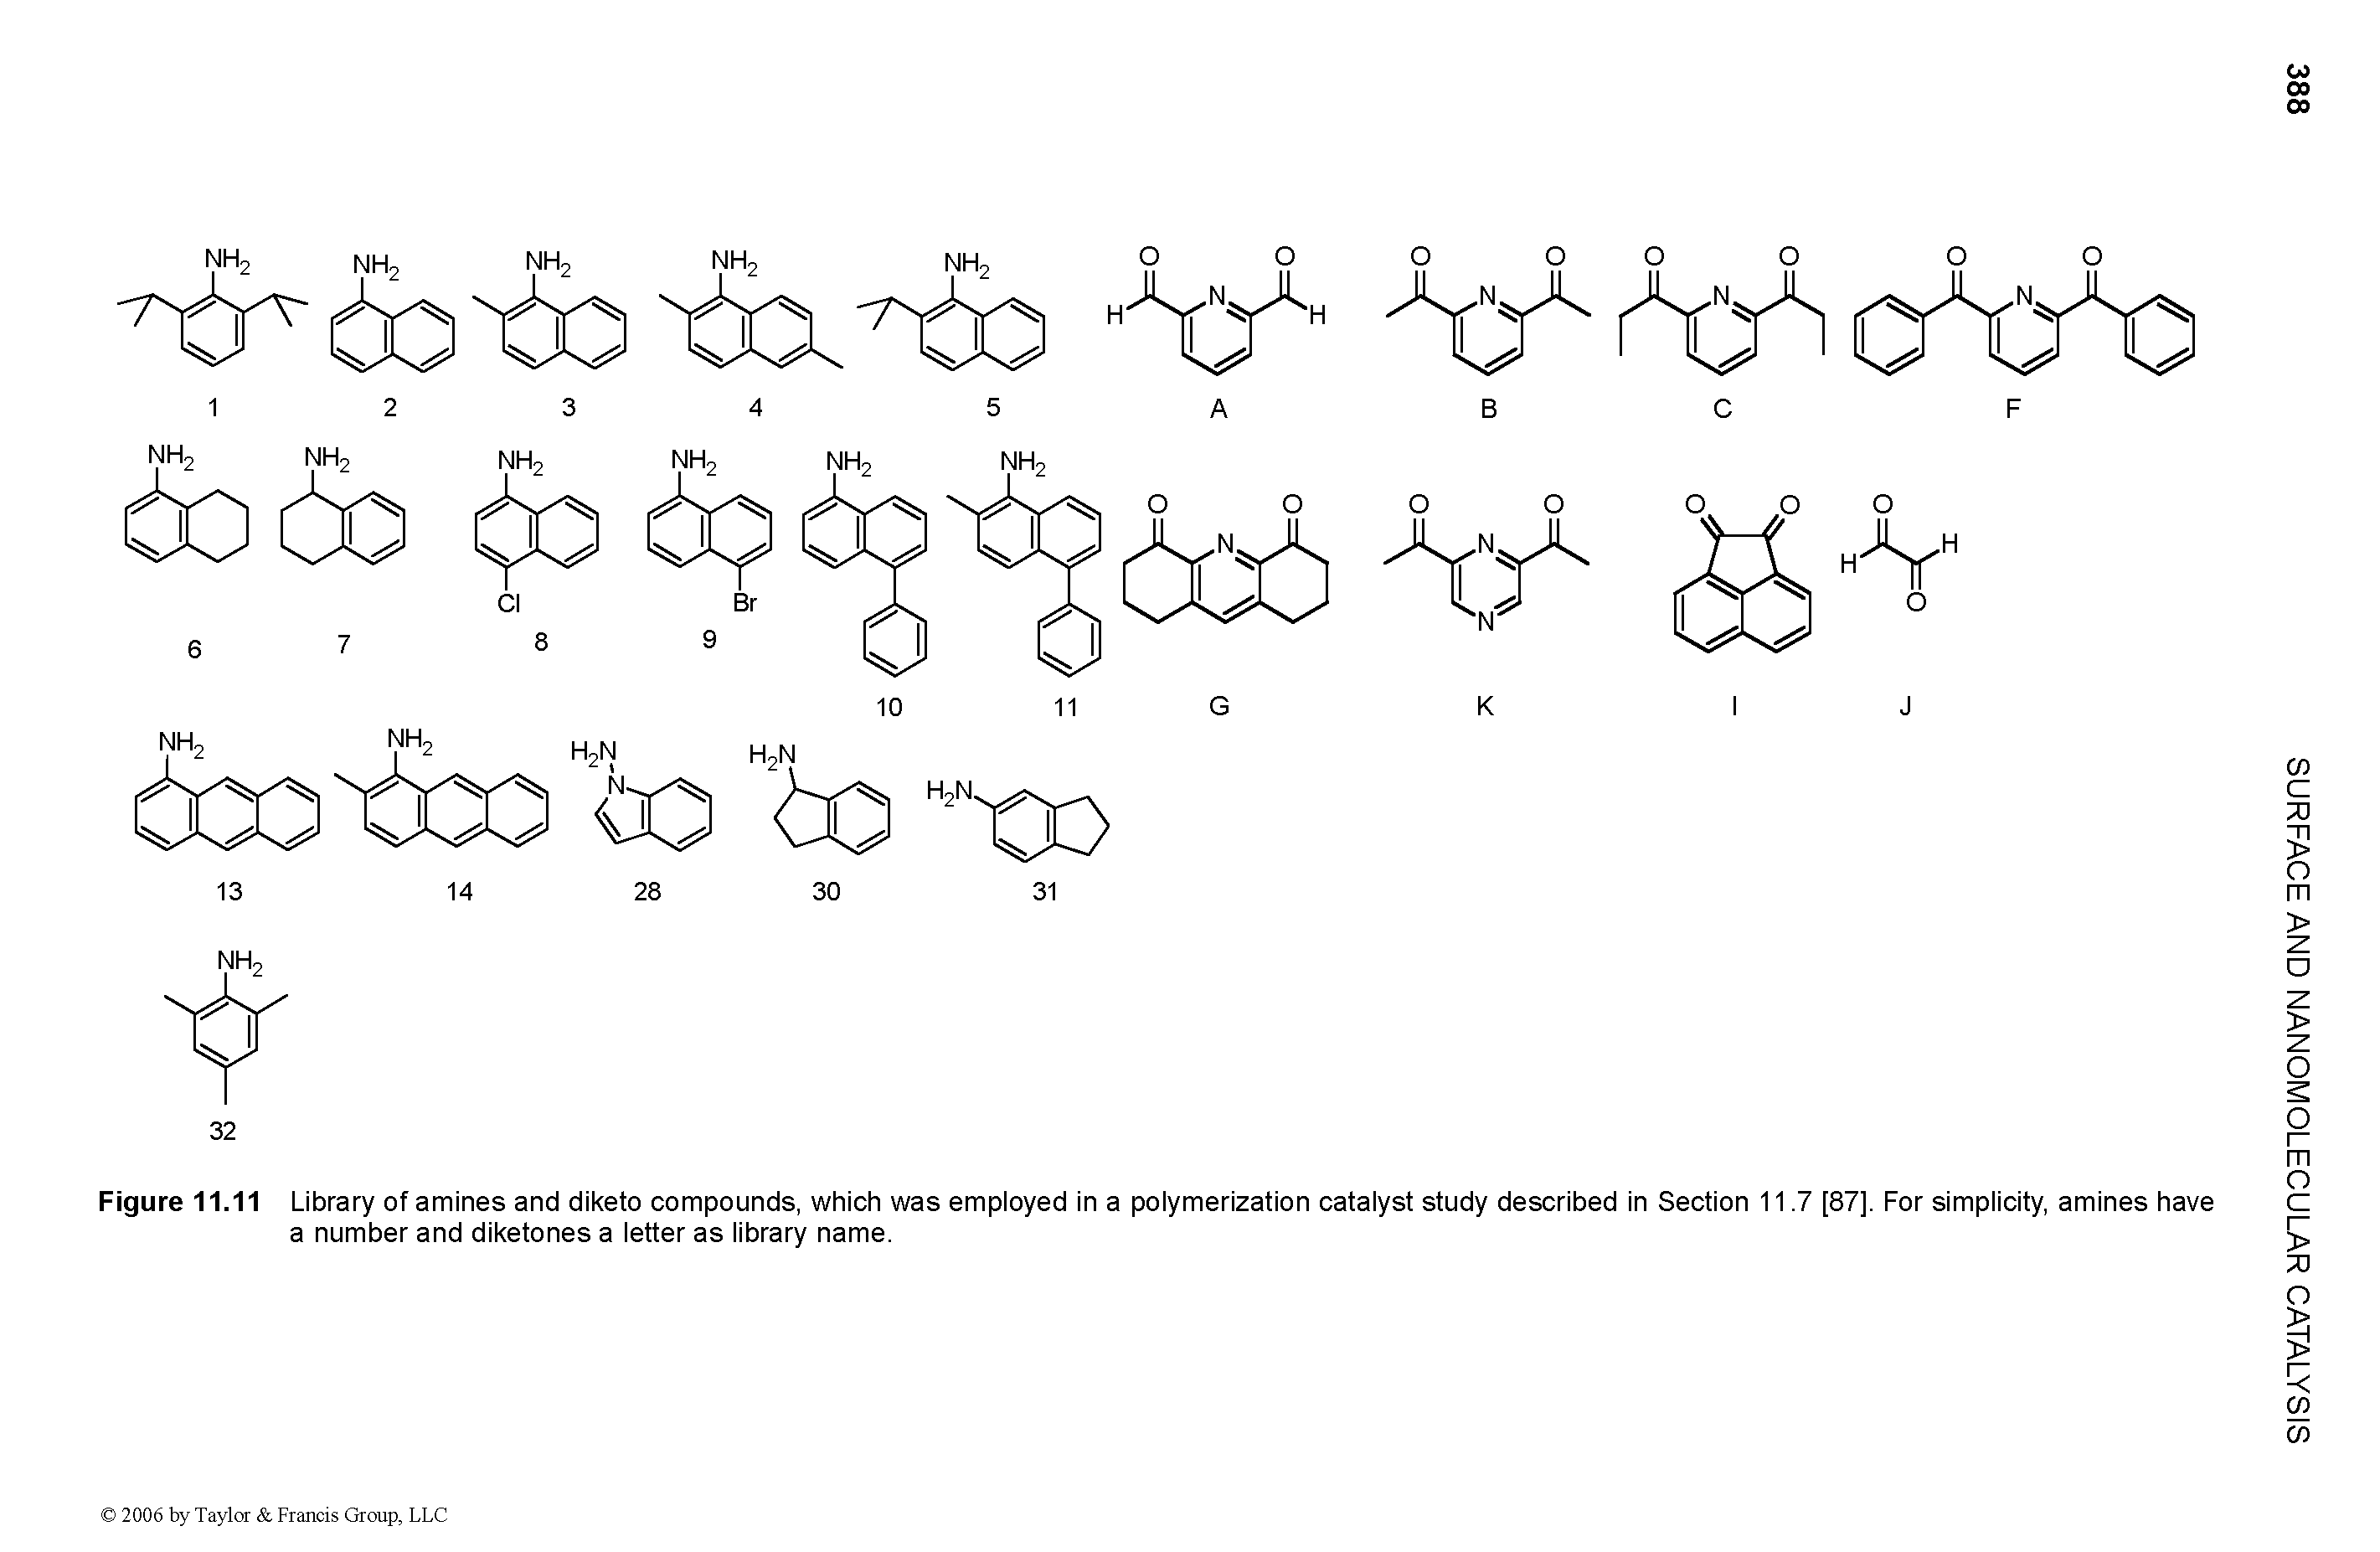 Figure 11.11 Library of amines and diketo compounds, which was employed in a polymerization catalyst study described in Section 11.7 [87], For simplicity, amines have a number and diketones a letter as library name.